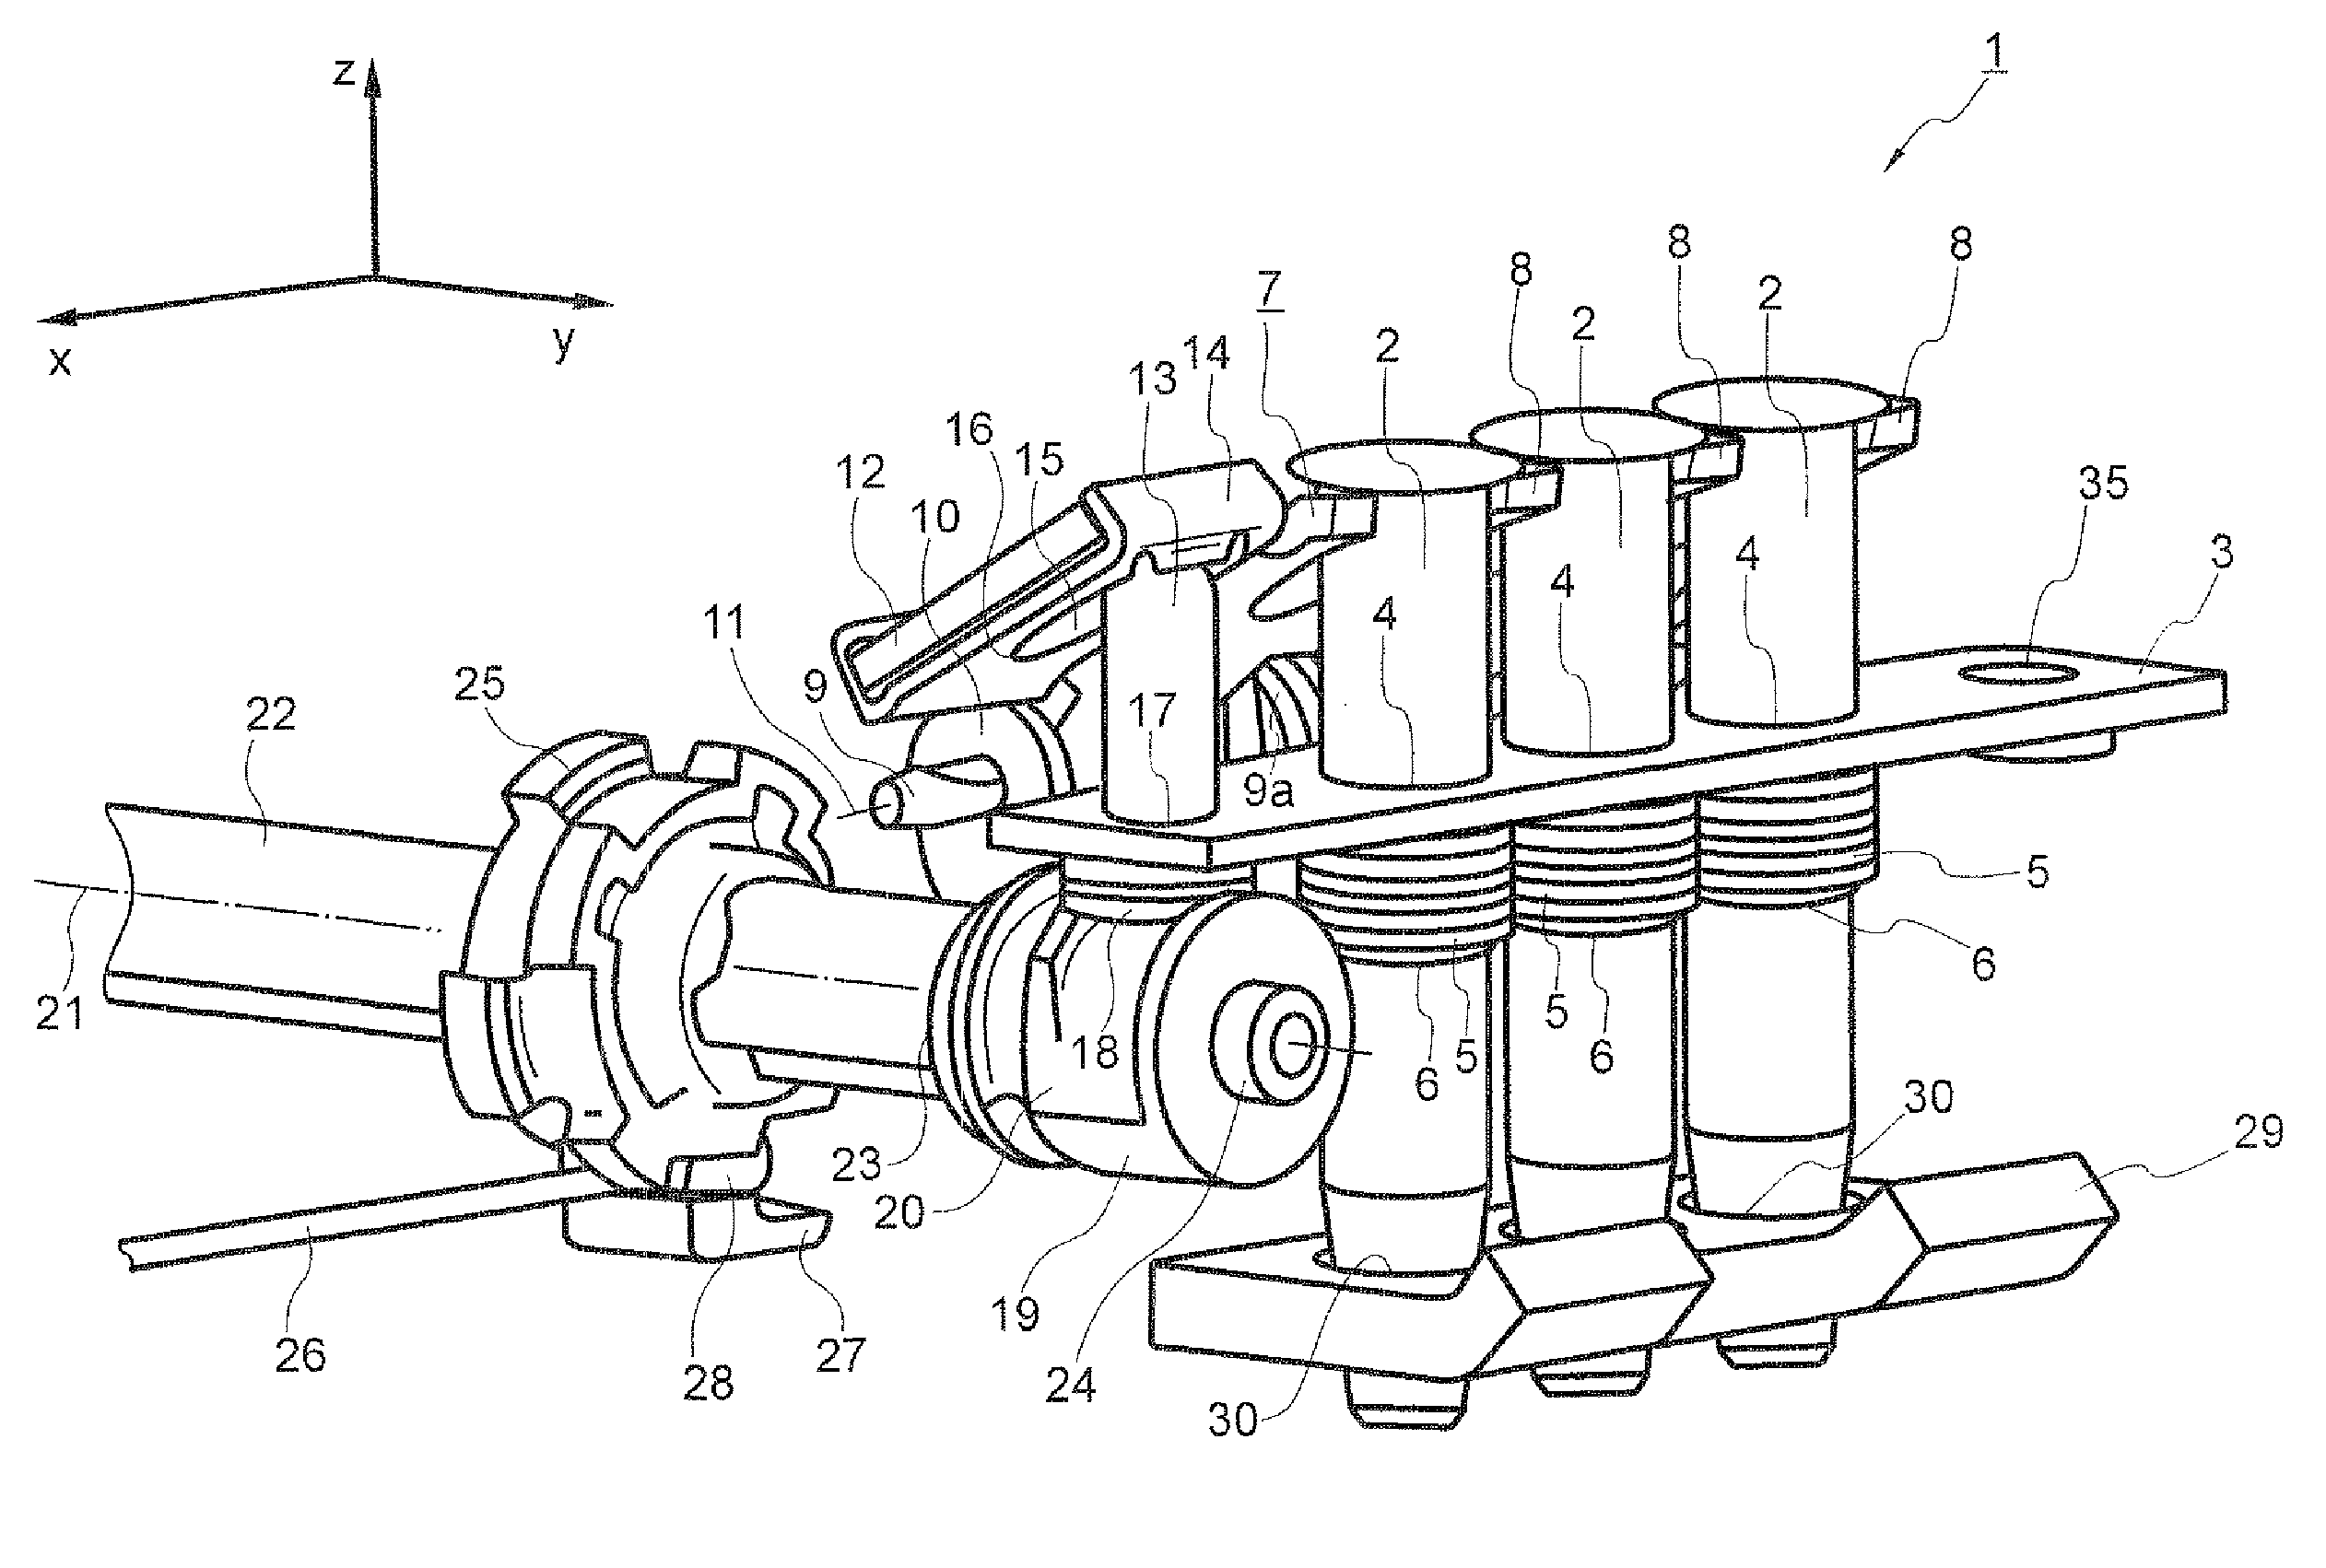 Locking device for a rail adjustment system